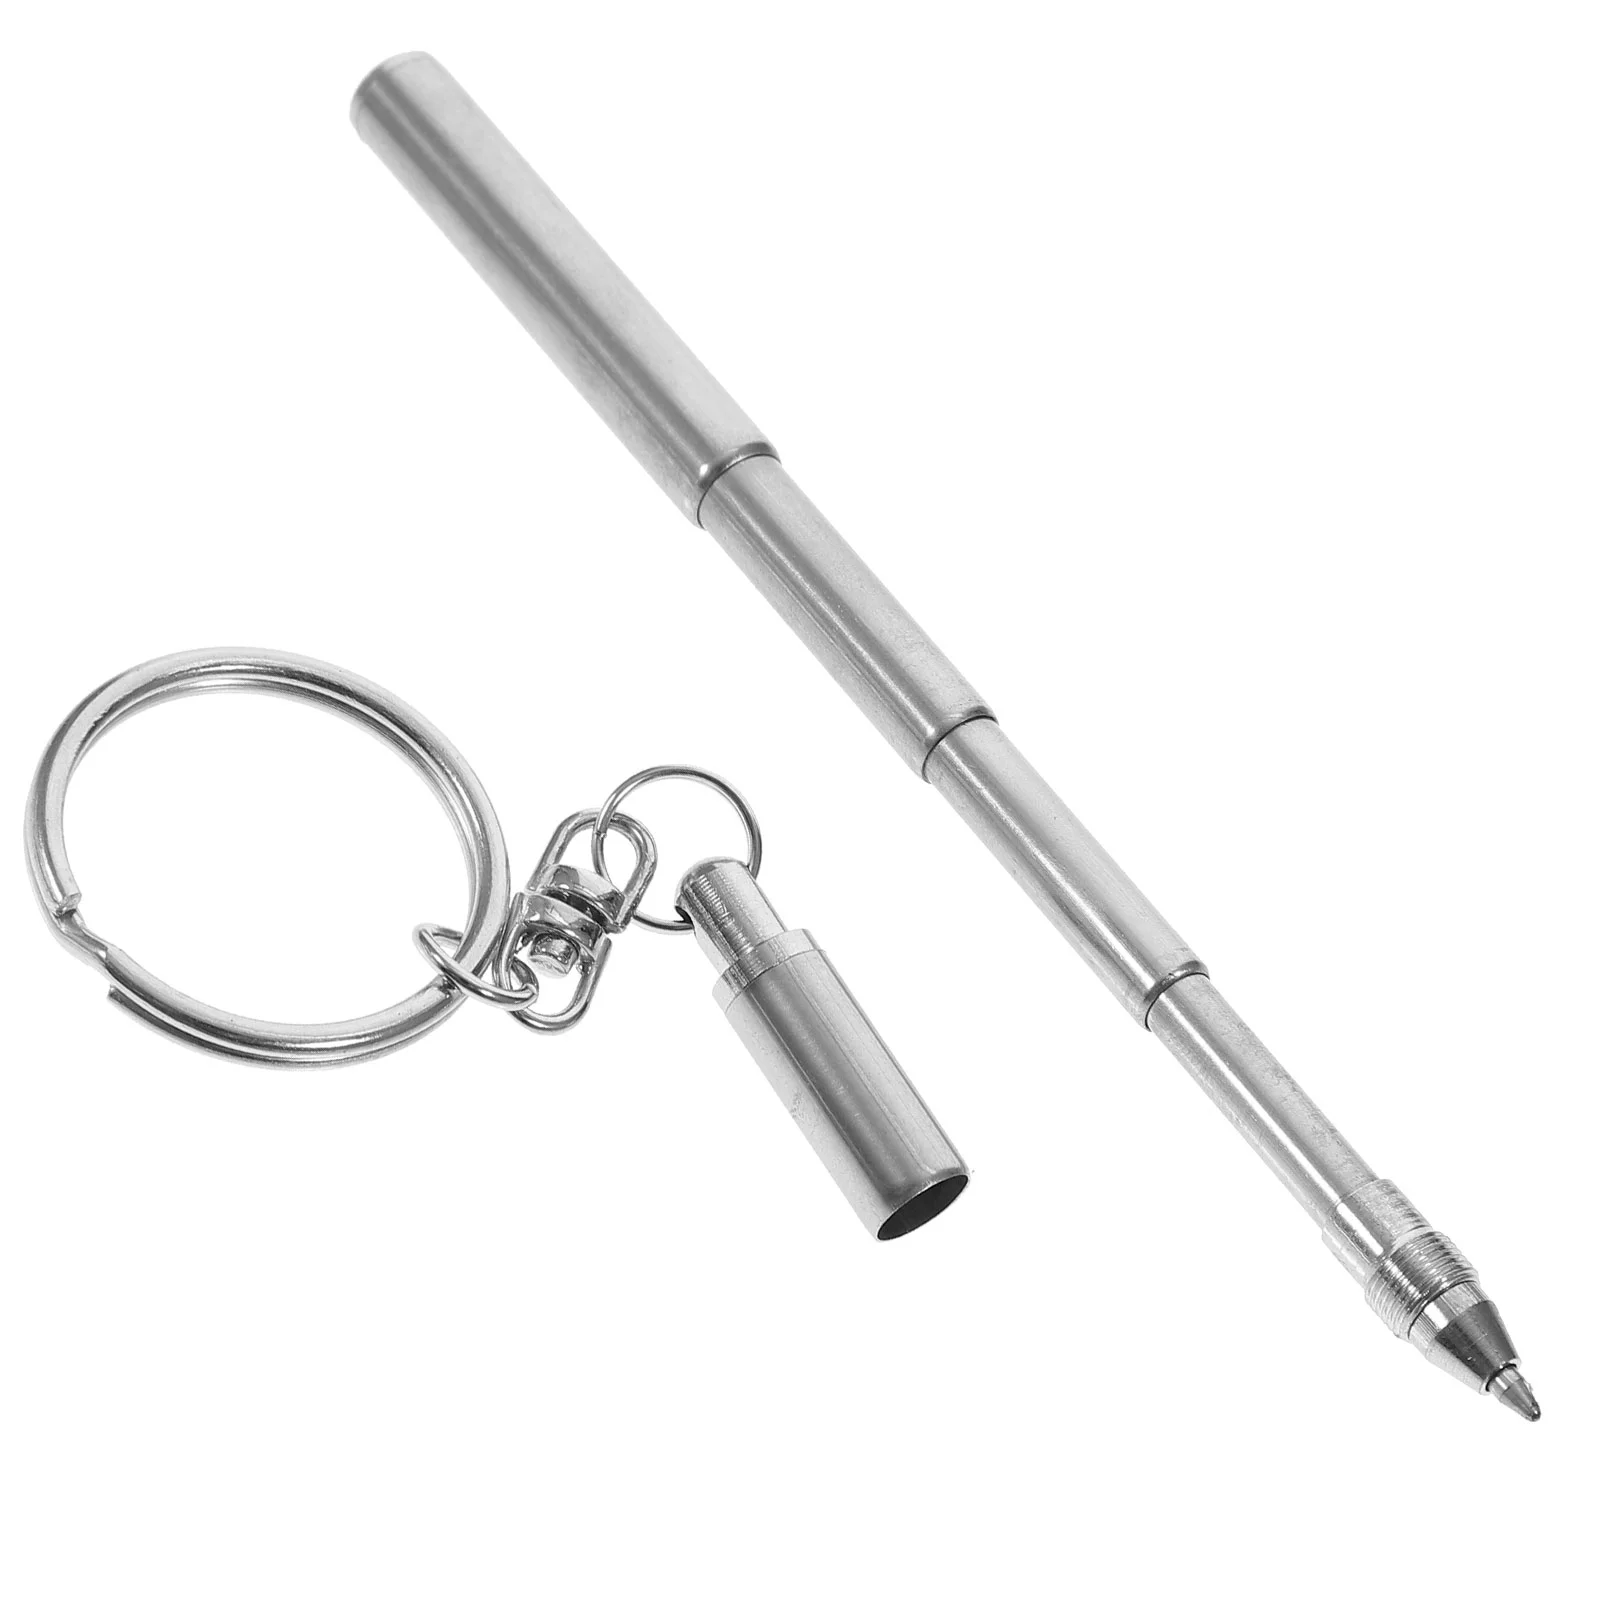 Retractable Pen Shape Keychain Mini Metal Key Ring Portable Stainless Steel Telescopic Ball Point Pens Black Keychain Tools 6 pcs gift table tennis ball keychain bag pendant sporting goods simulated racket red 6pcs miss decor metal